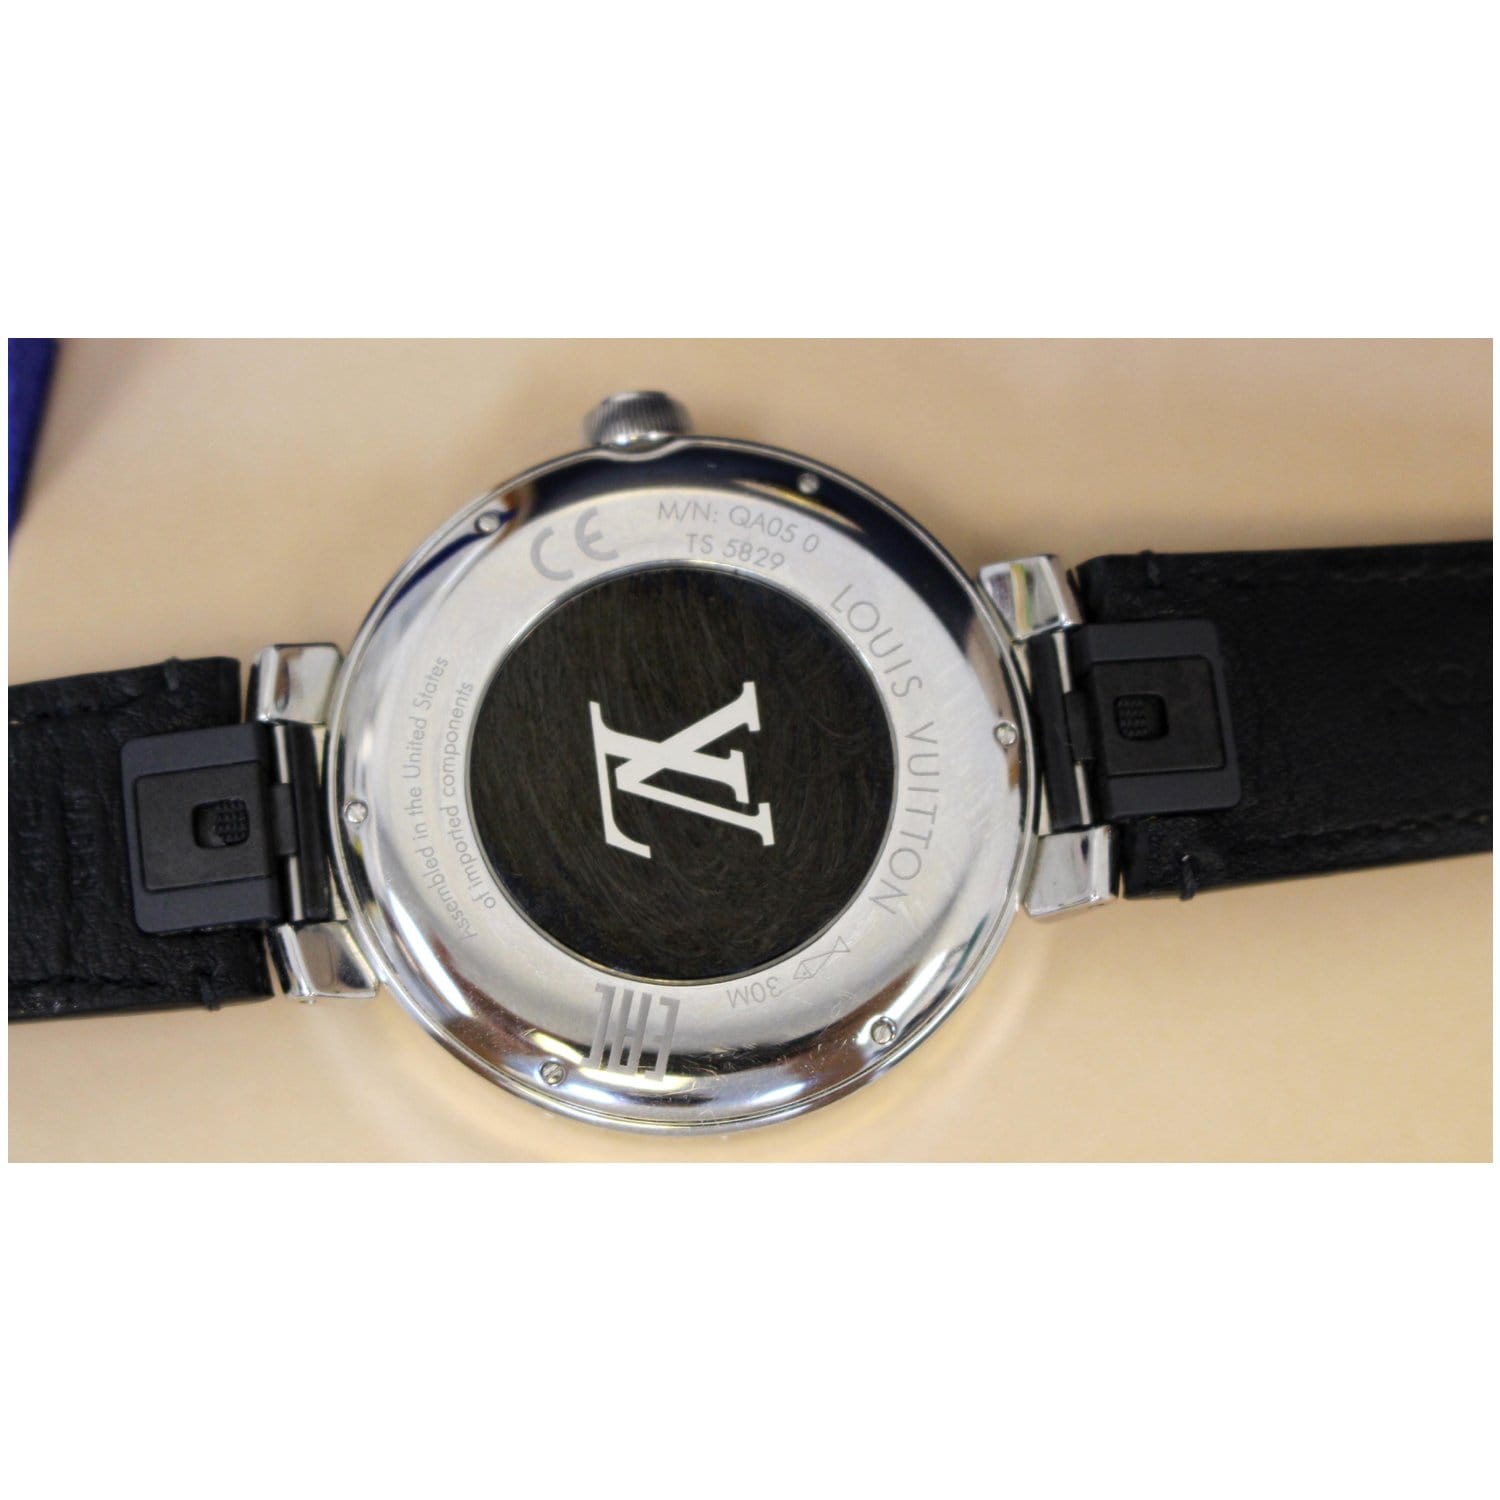 Tambour Monogram Eclipse Canvas Strap - Watches - Traditional Watches